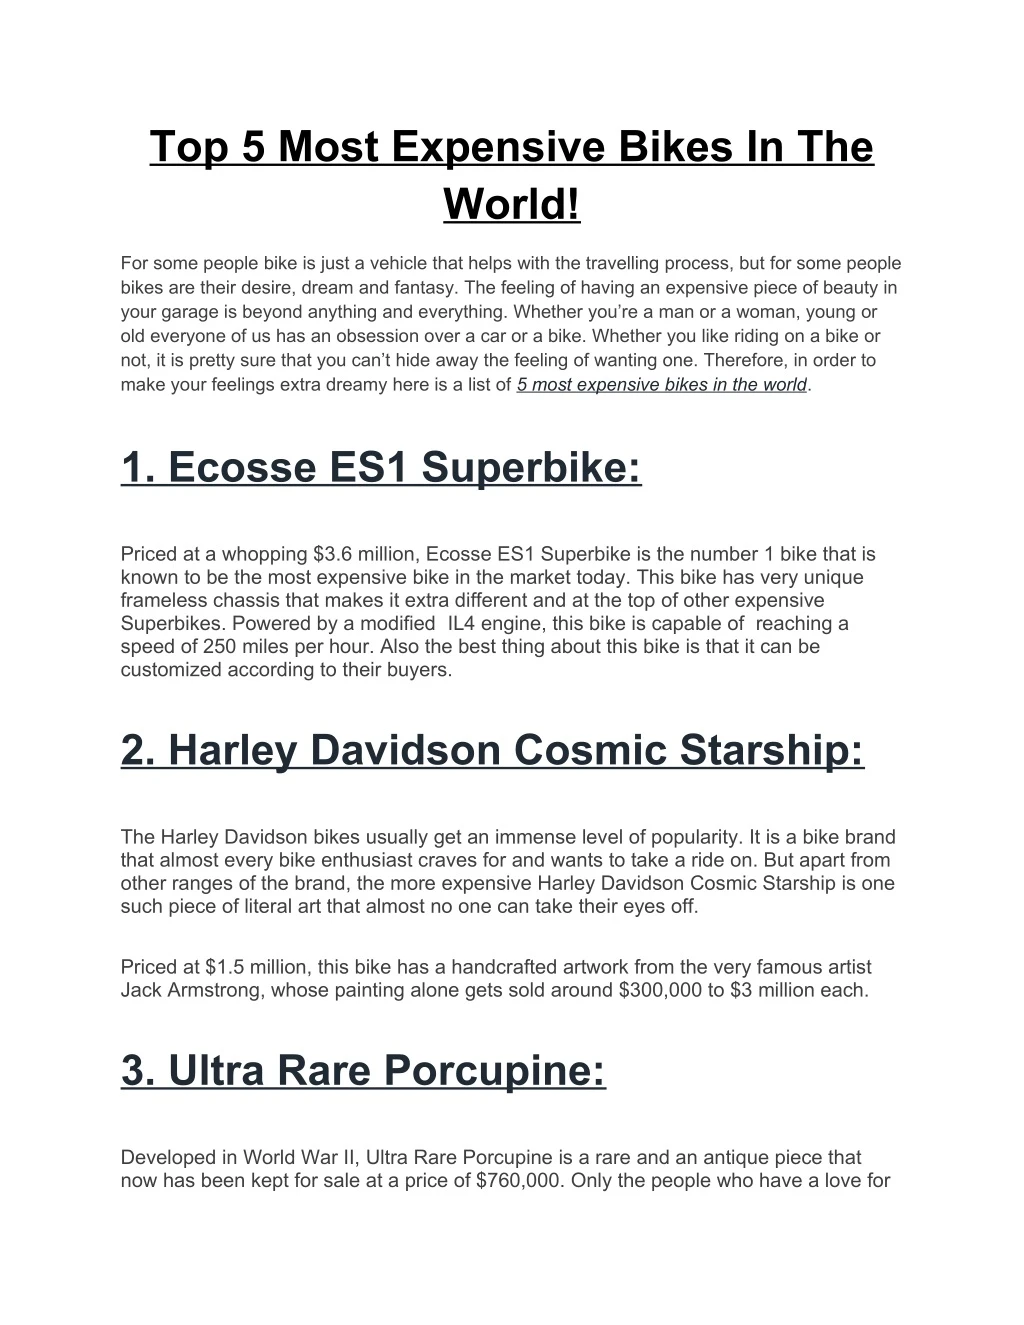 PPT Top Most Expensive Bikes In The World PowerPoint Presentation ID